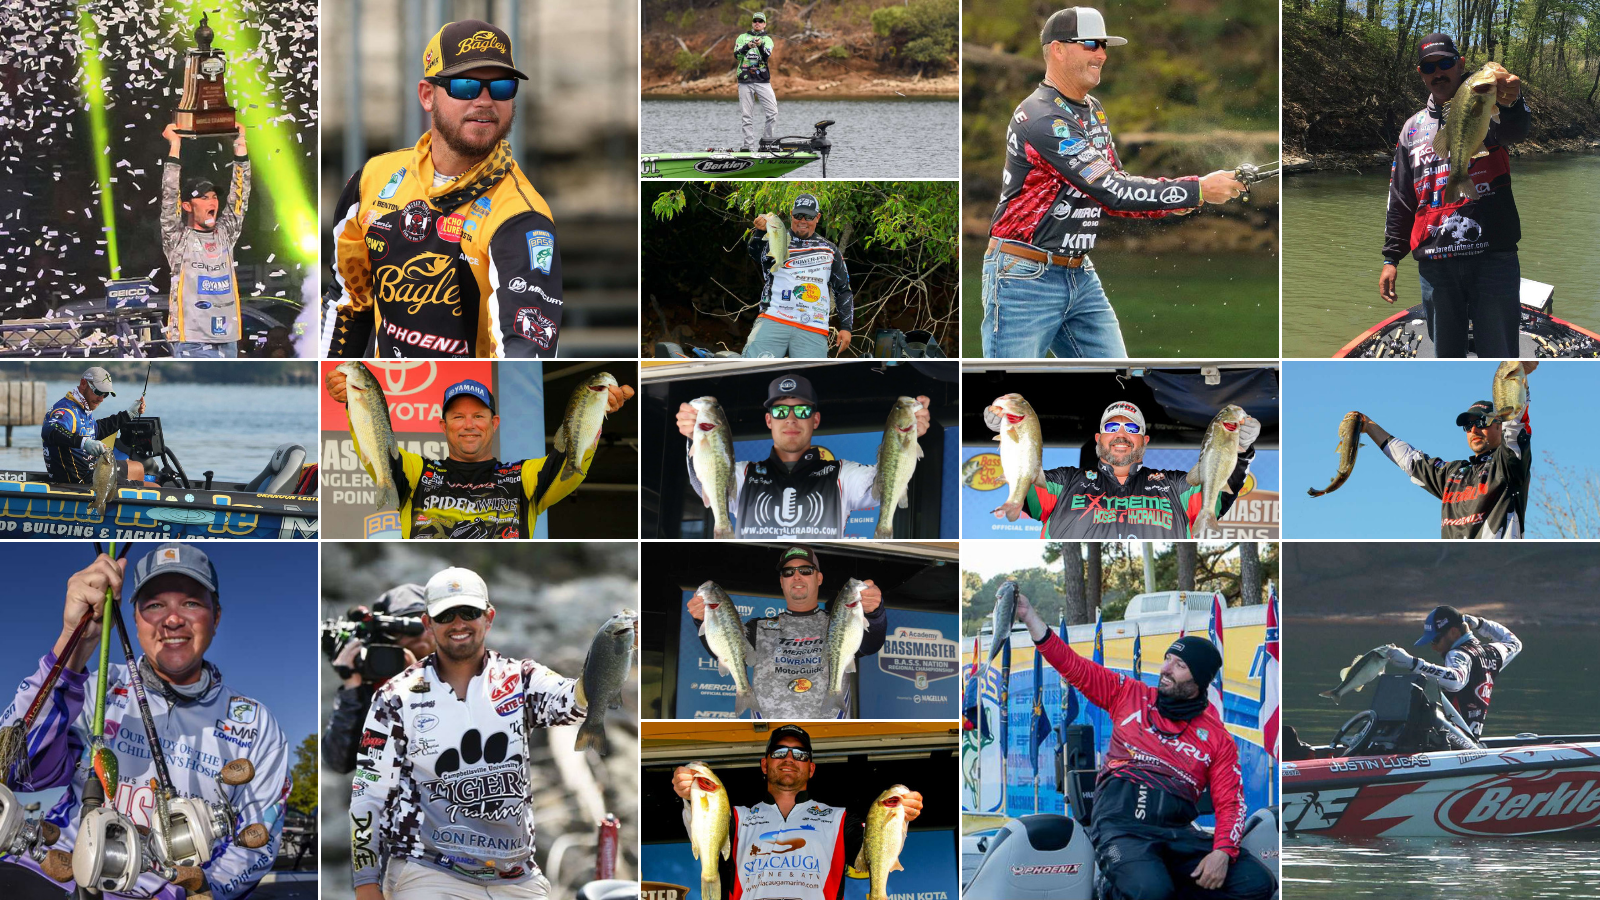 The field is set! Here's a look at the 52 anglers who have qualified for the 2019 GEICO Bassmaster Classic presented by DICK'S Sporting Goods. 